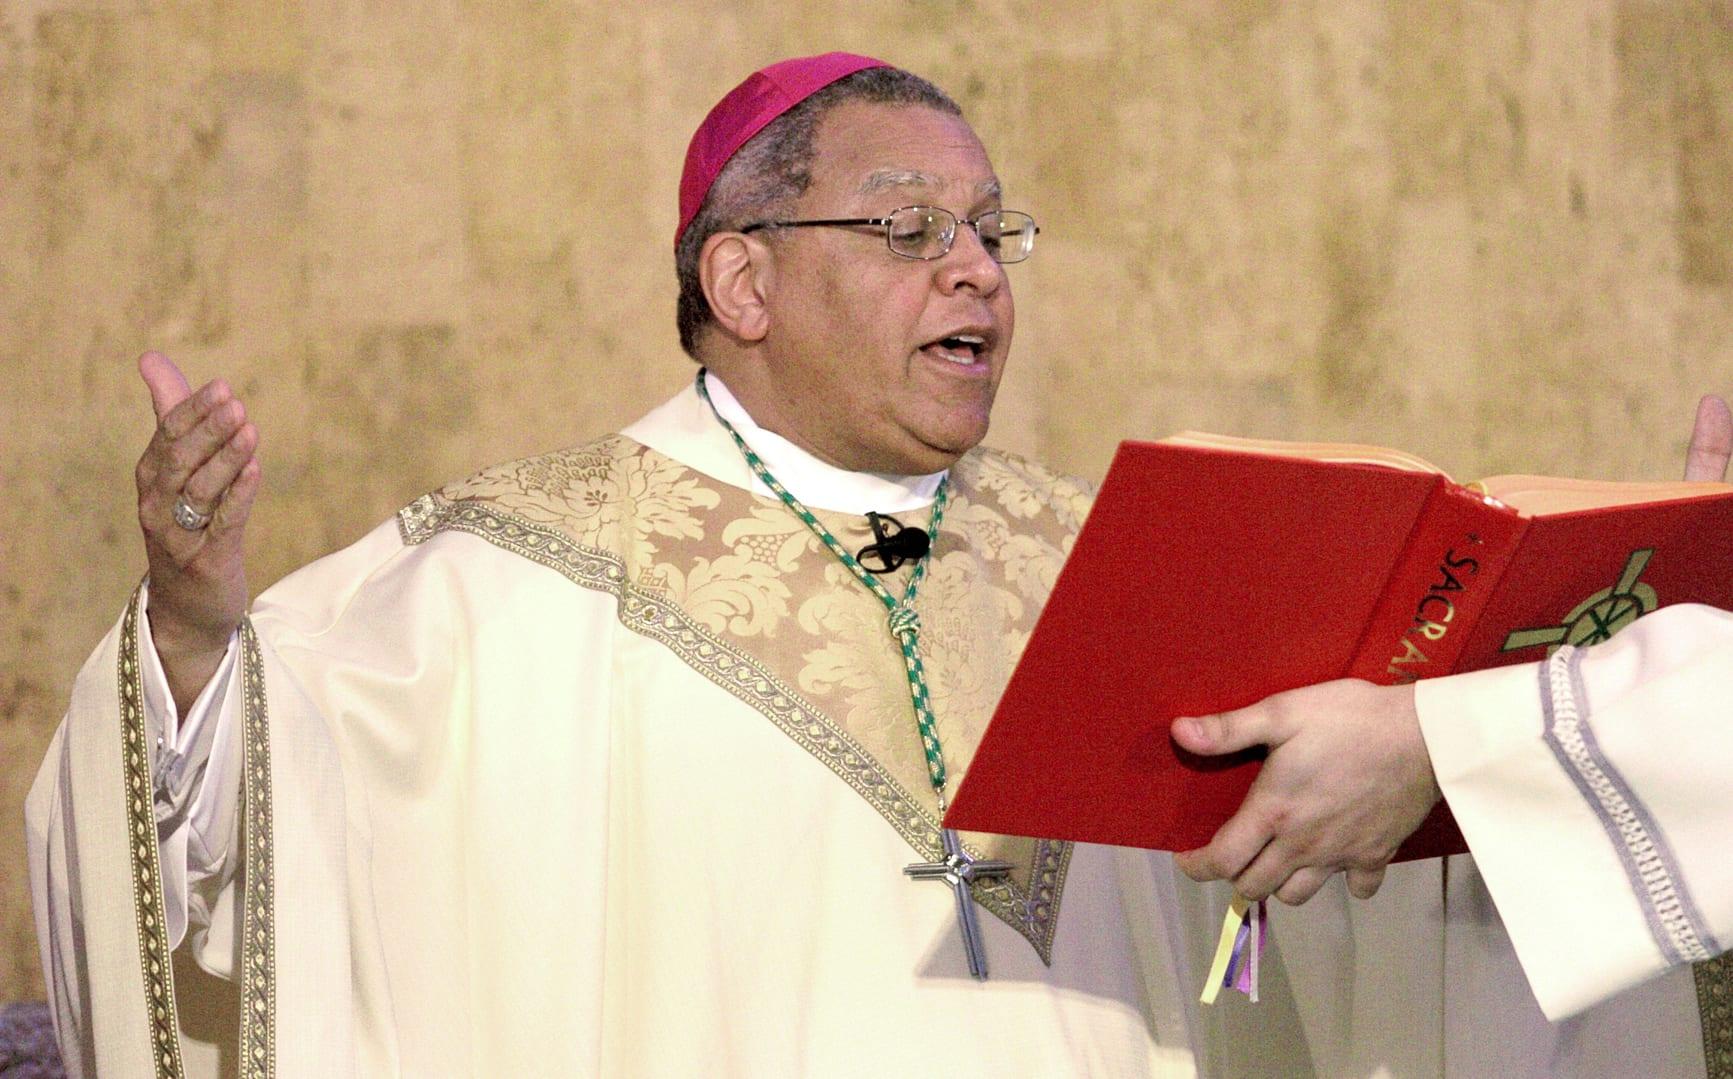 4th Catholic diocese in Ohio to release abusive priests list